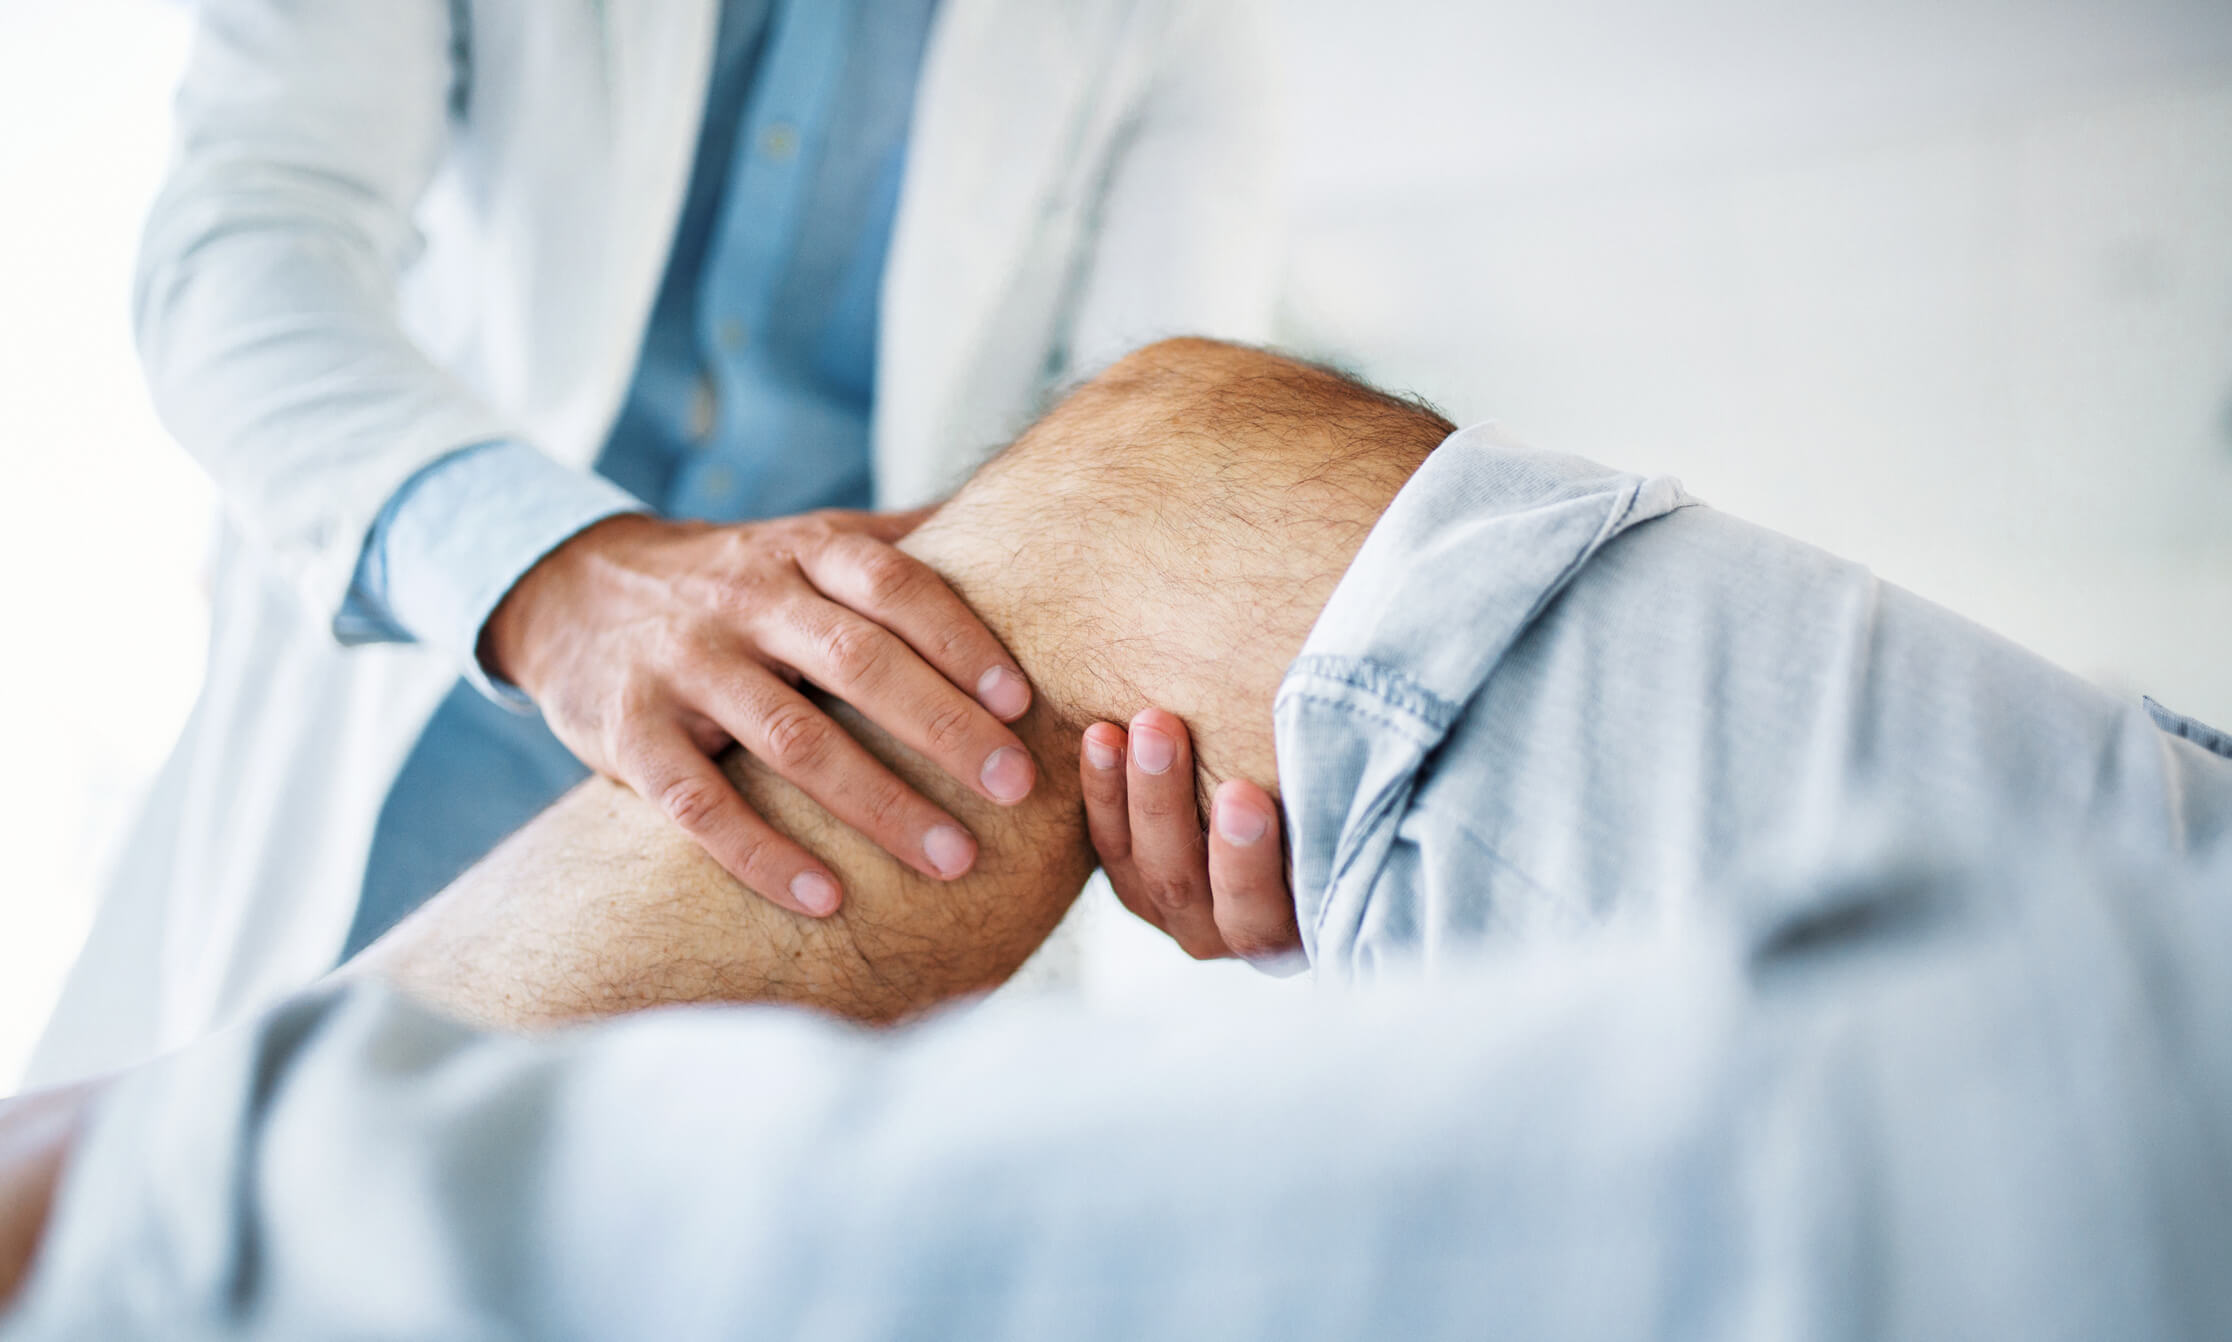 South Island Orthopedics gives an overview of rheumatoid arthritis in the knee.